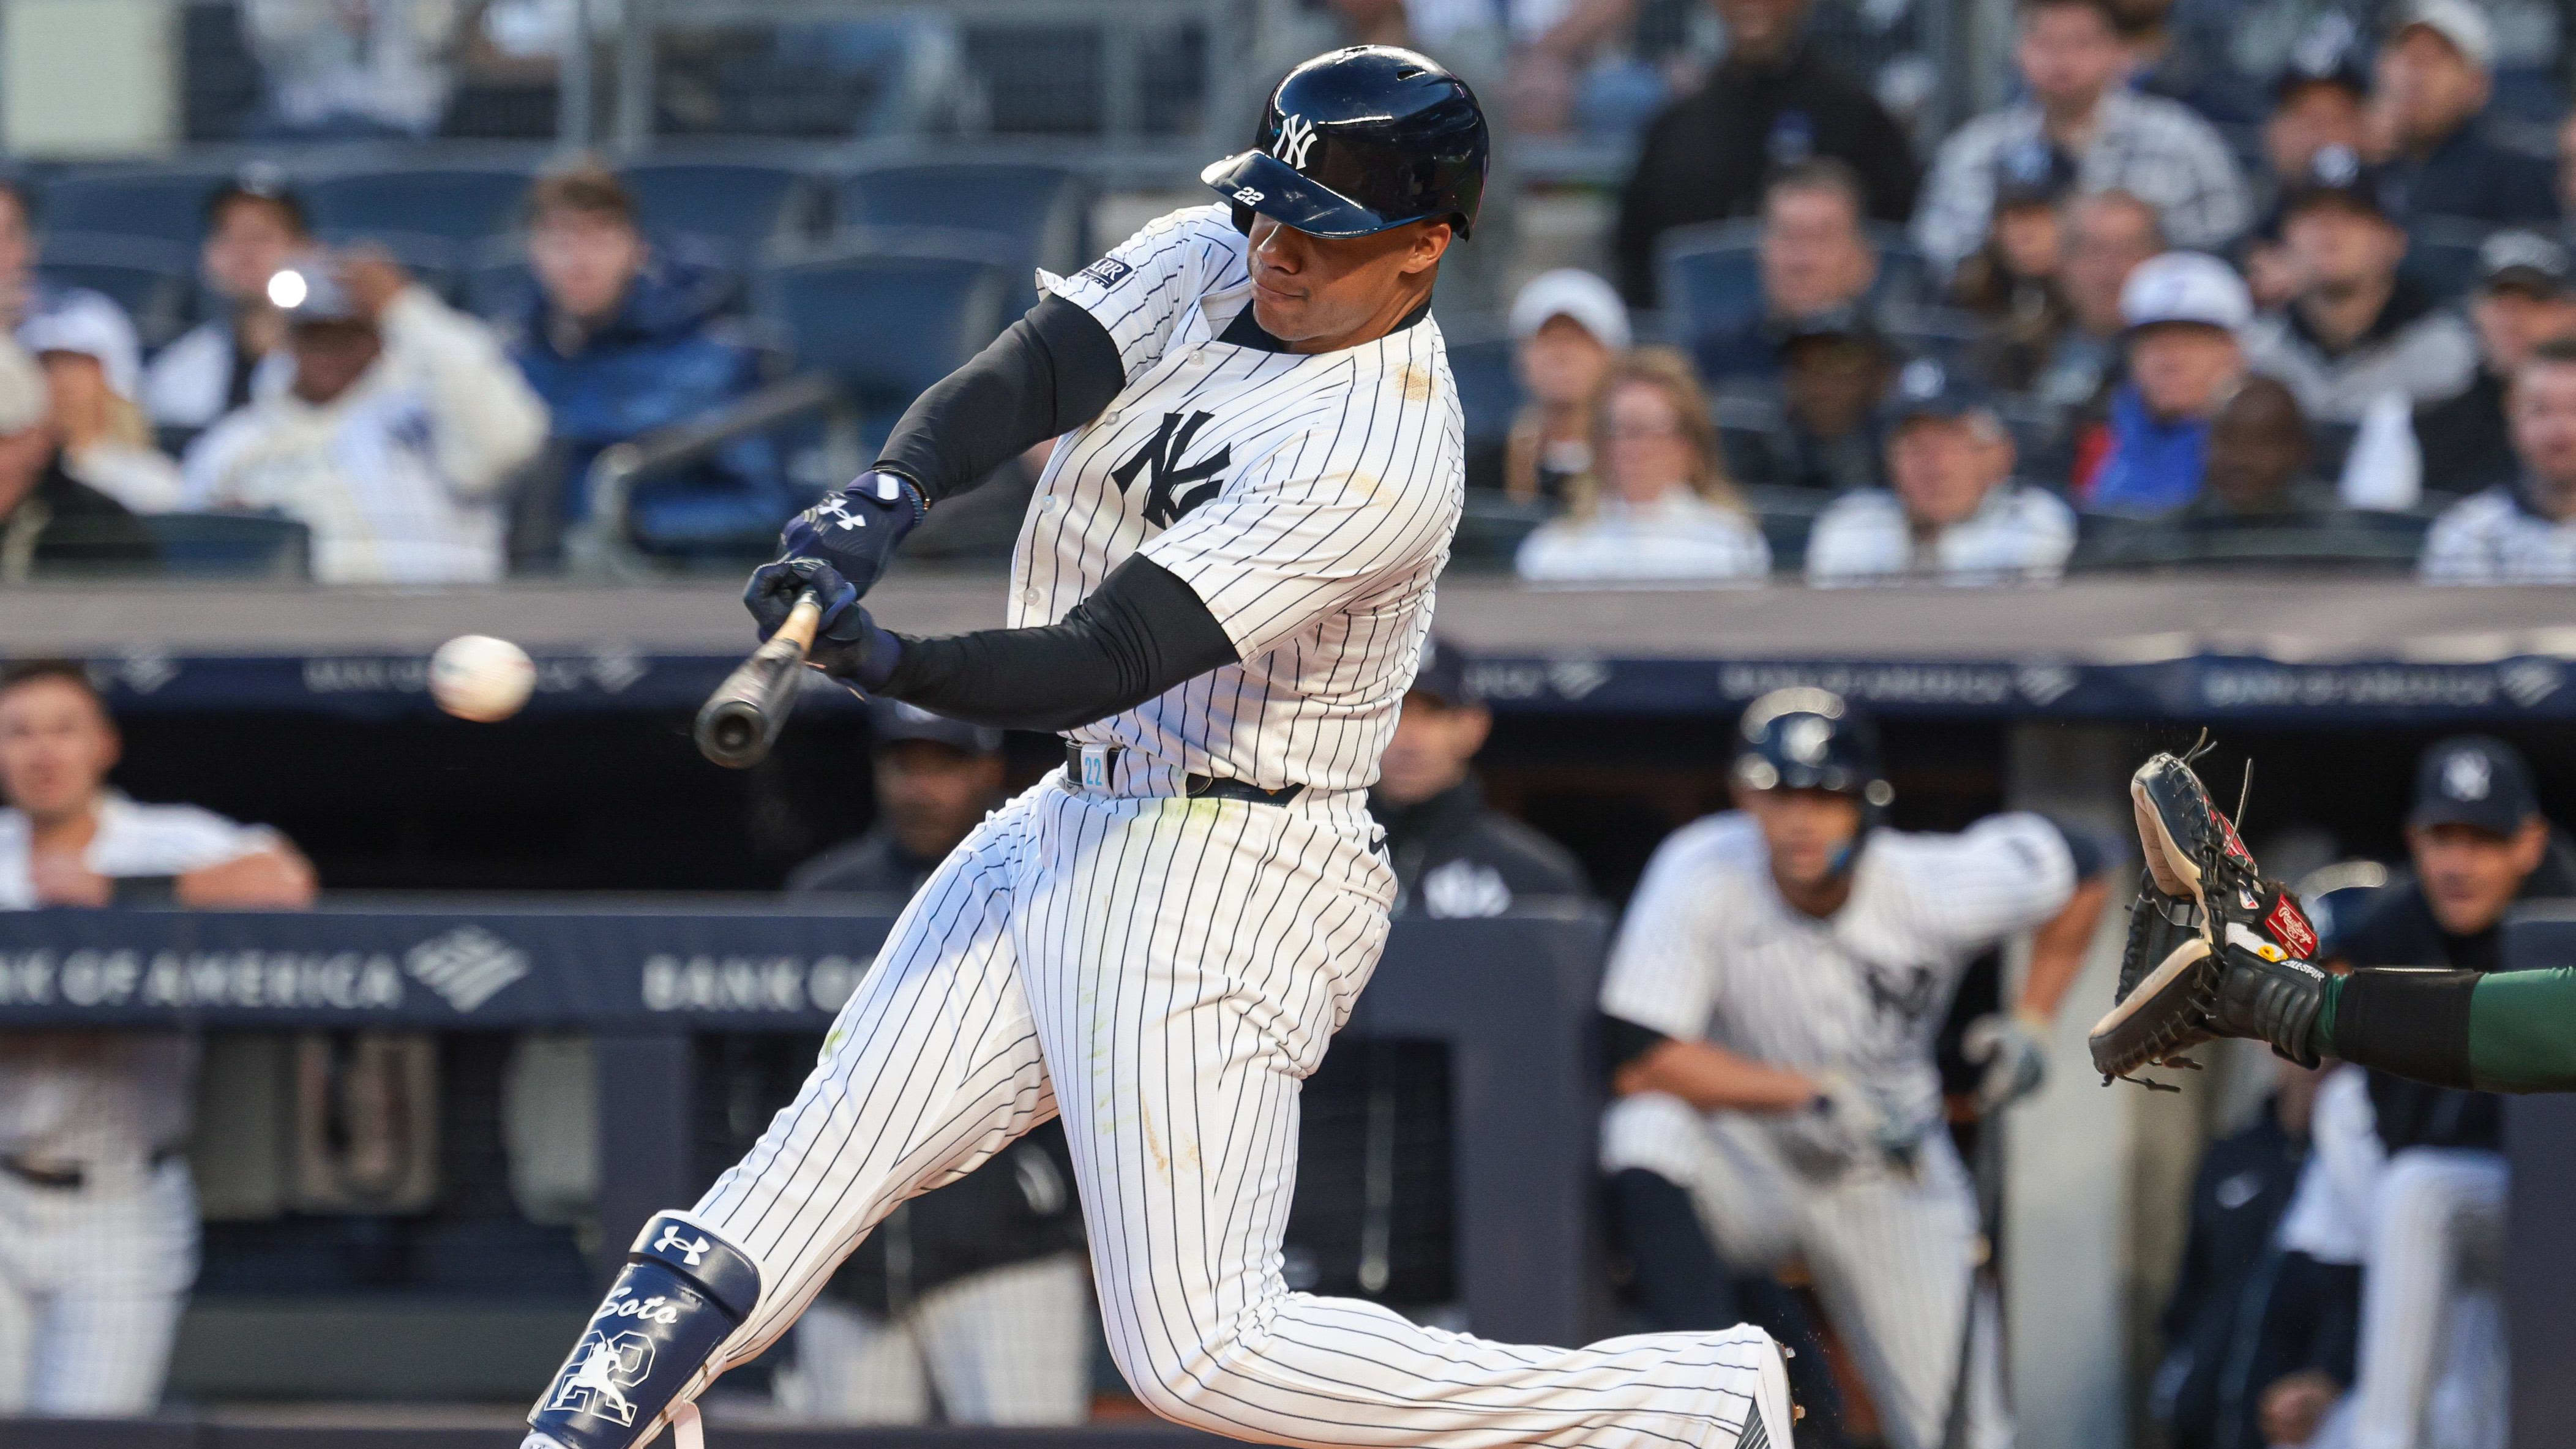 Insider Hints at Yankees Losing Superstar to Crosstown Rival Mets